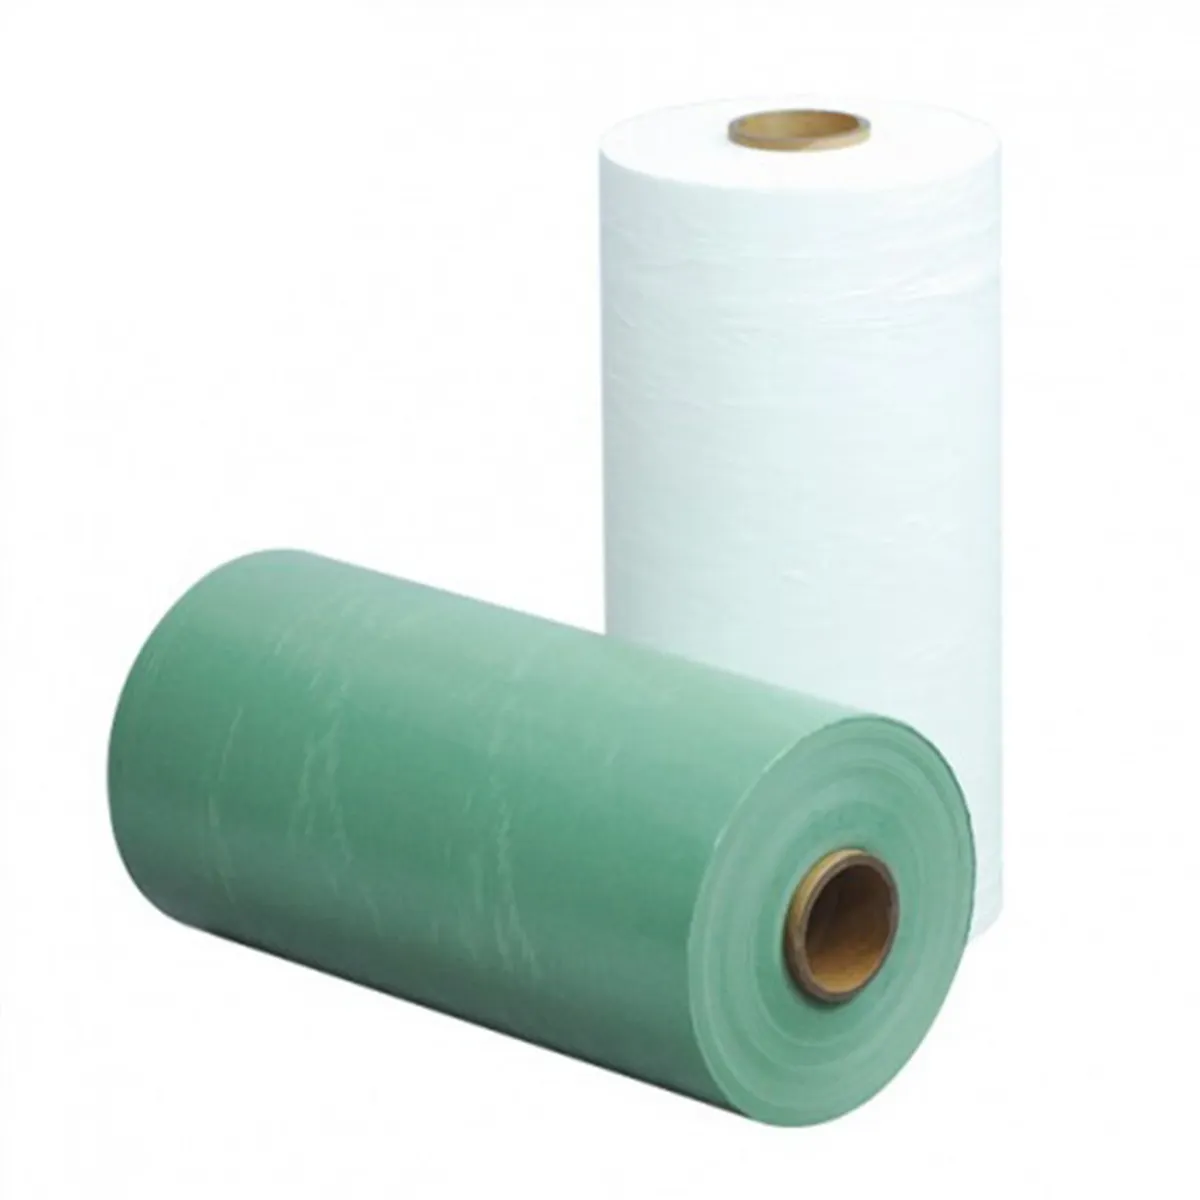 Customized Design Agricultural Packaging Film Usage LLDPE Milky White Silage Bale Stretch Wrap Film